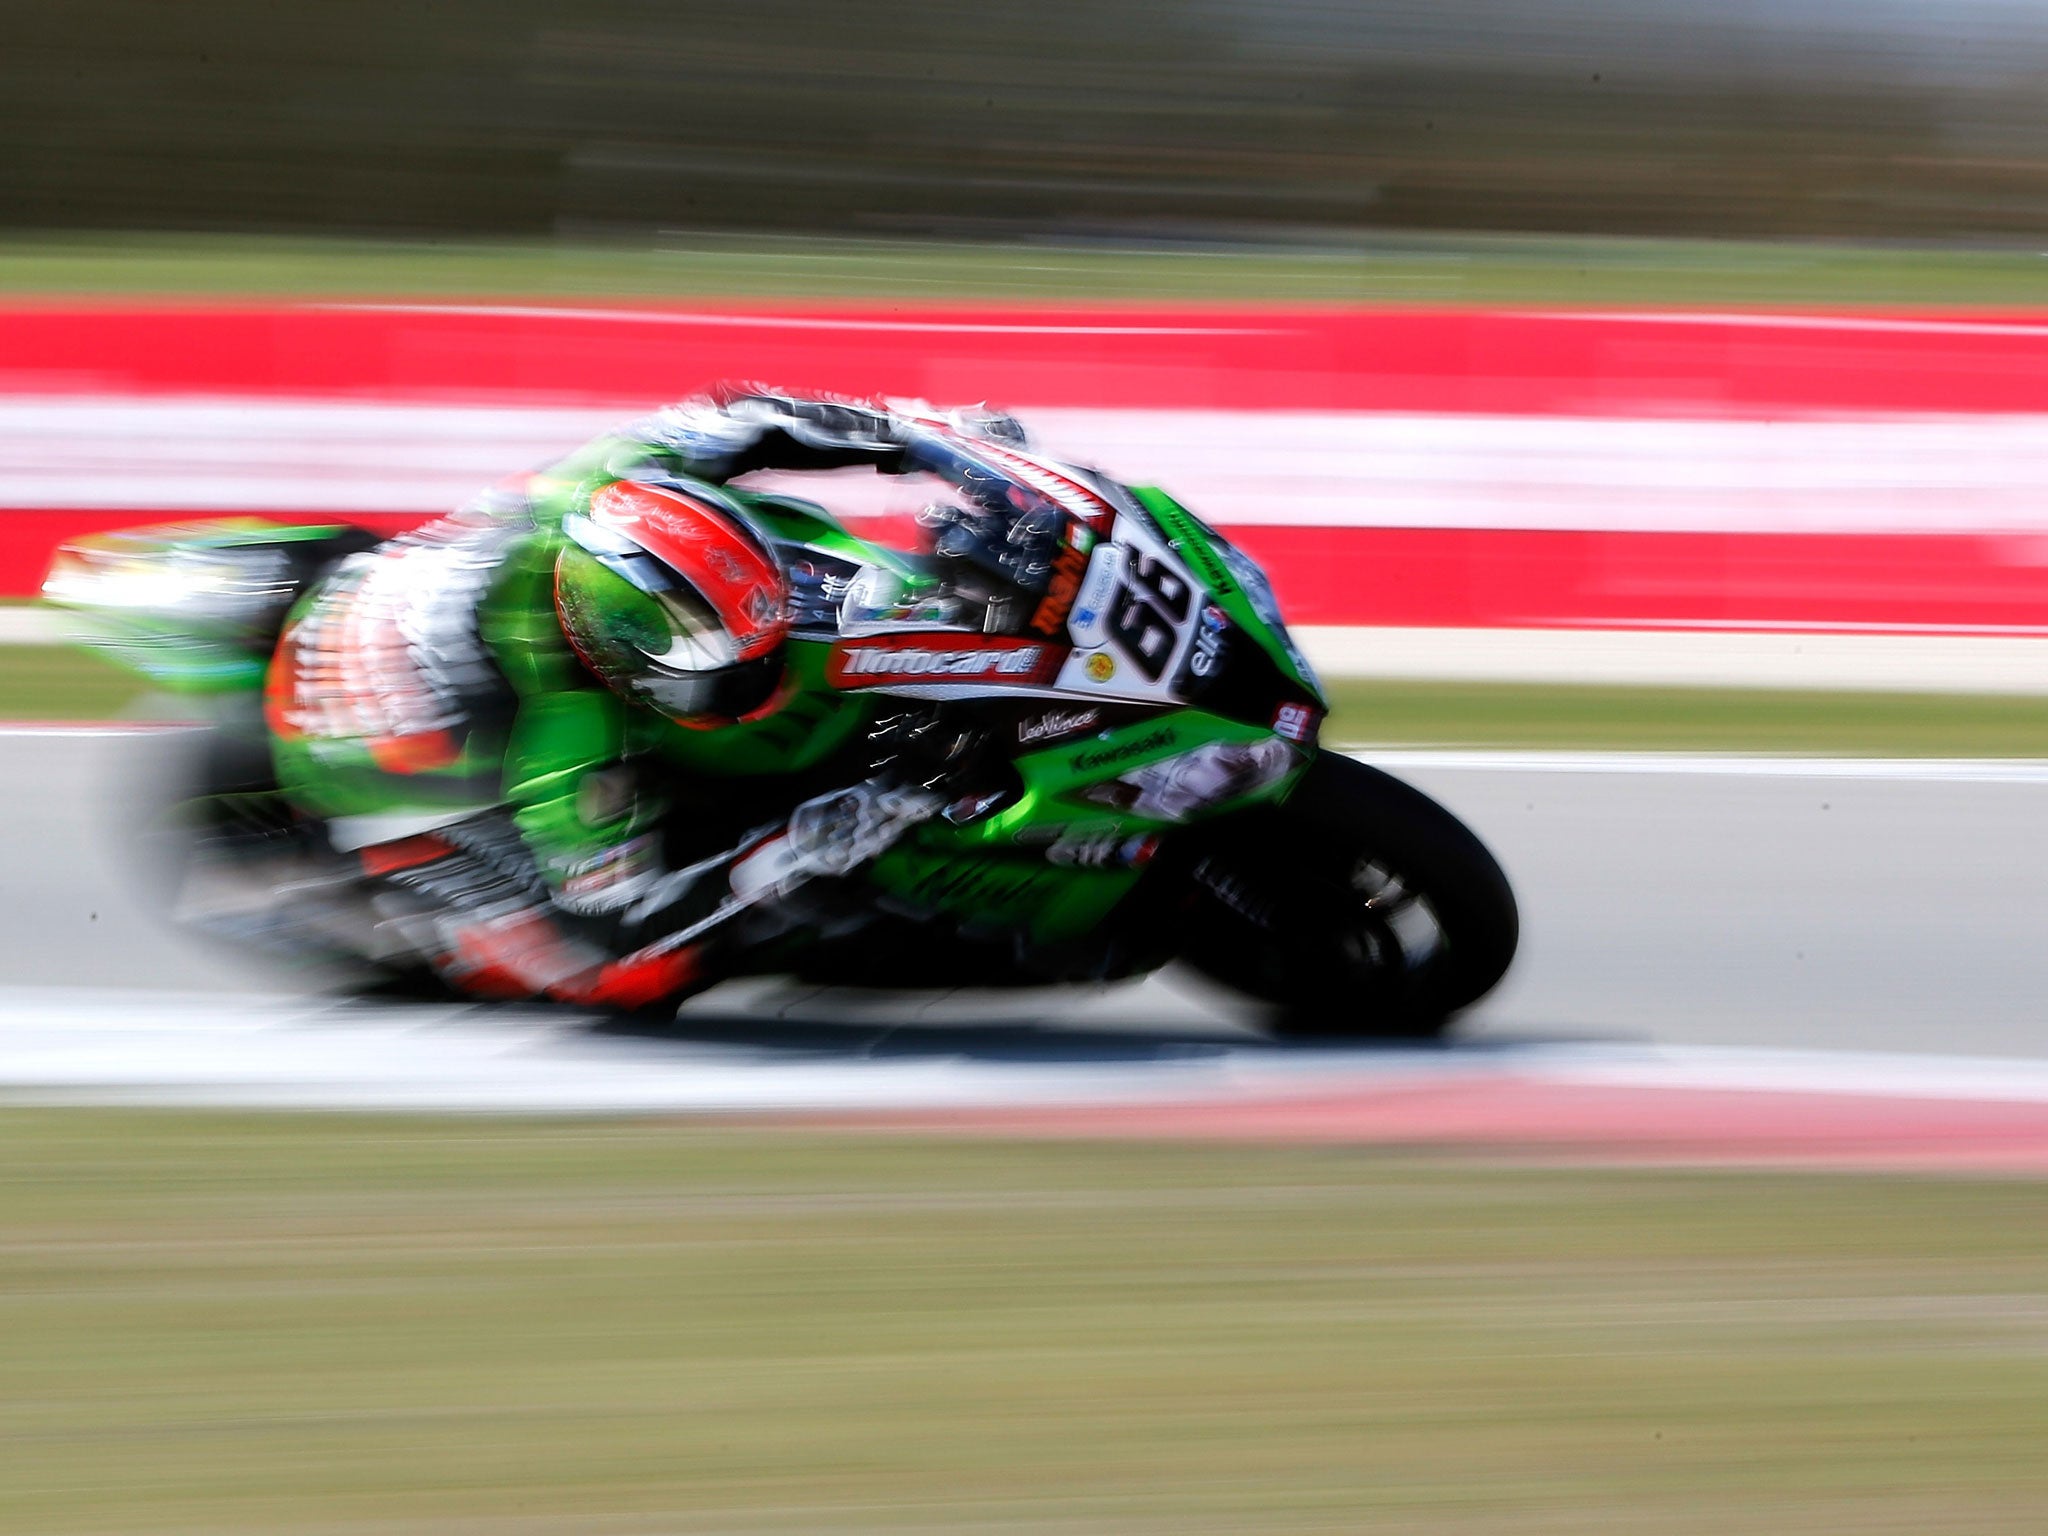 Tom Sykes leans into a bend on his Kawasaki ZX-10R